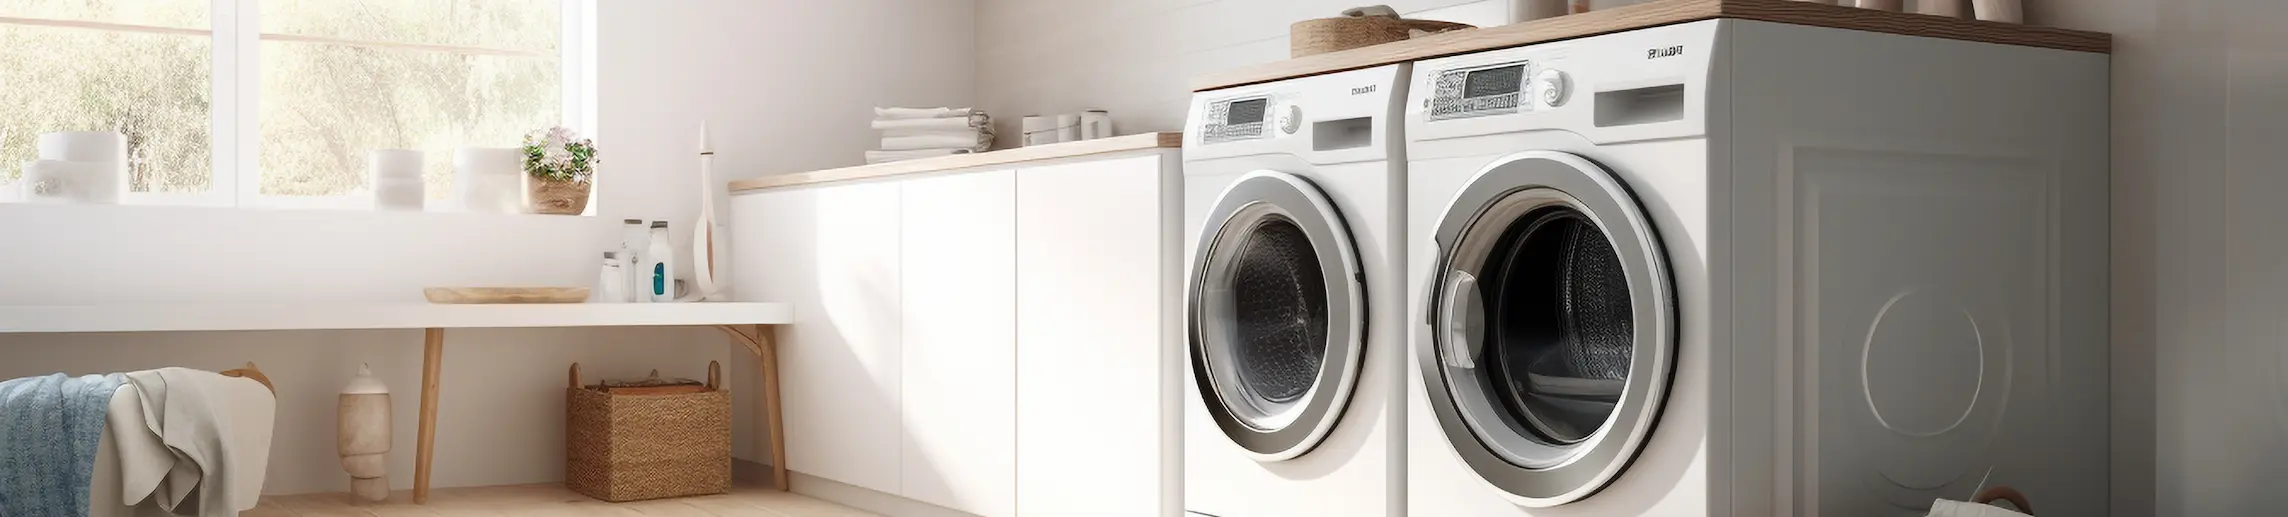 Bright and tidy home laundry room with white washer and dryer.